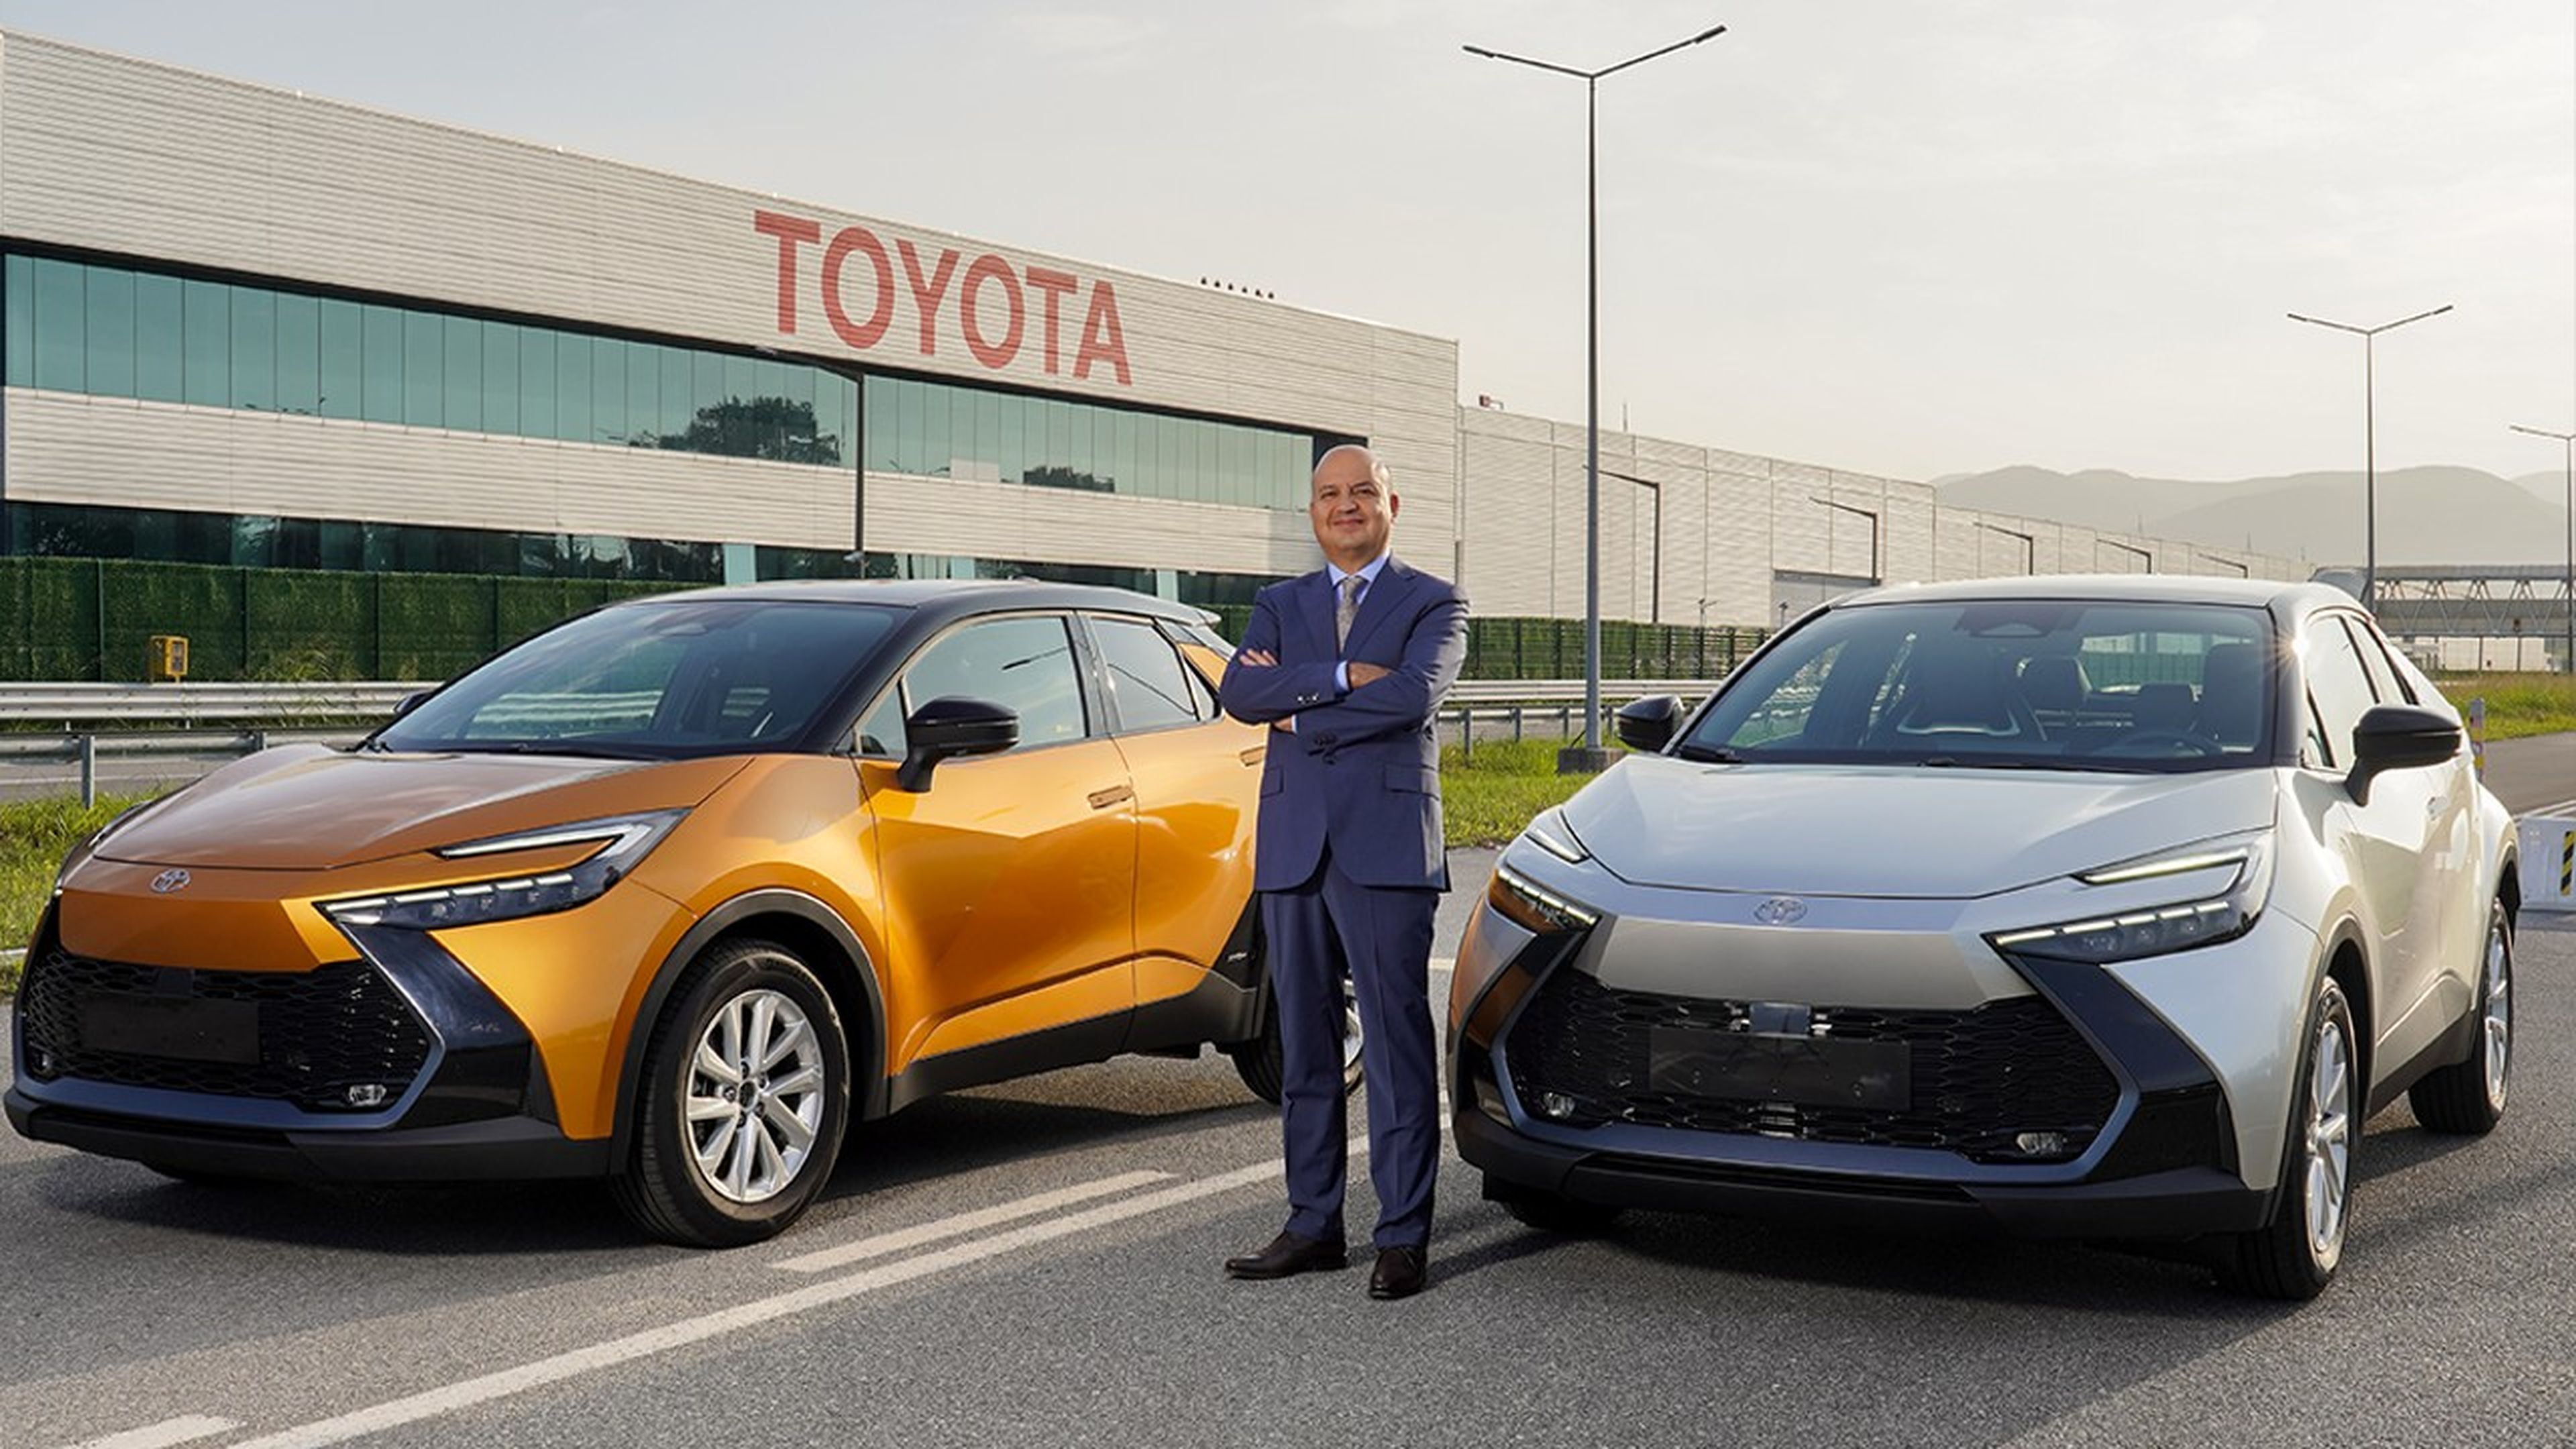 Production Of The New Toyota C-Hr Has Begun